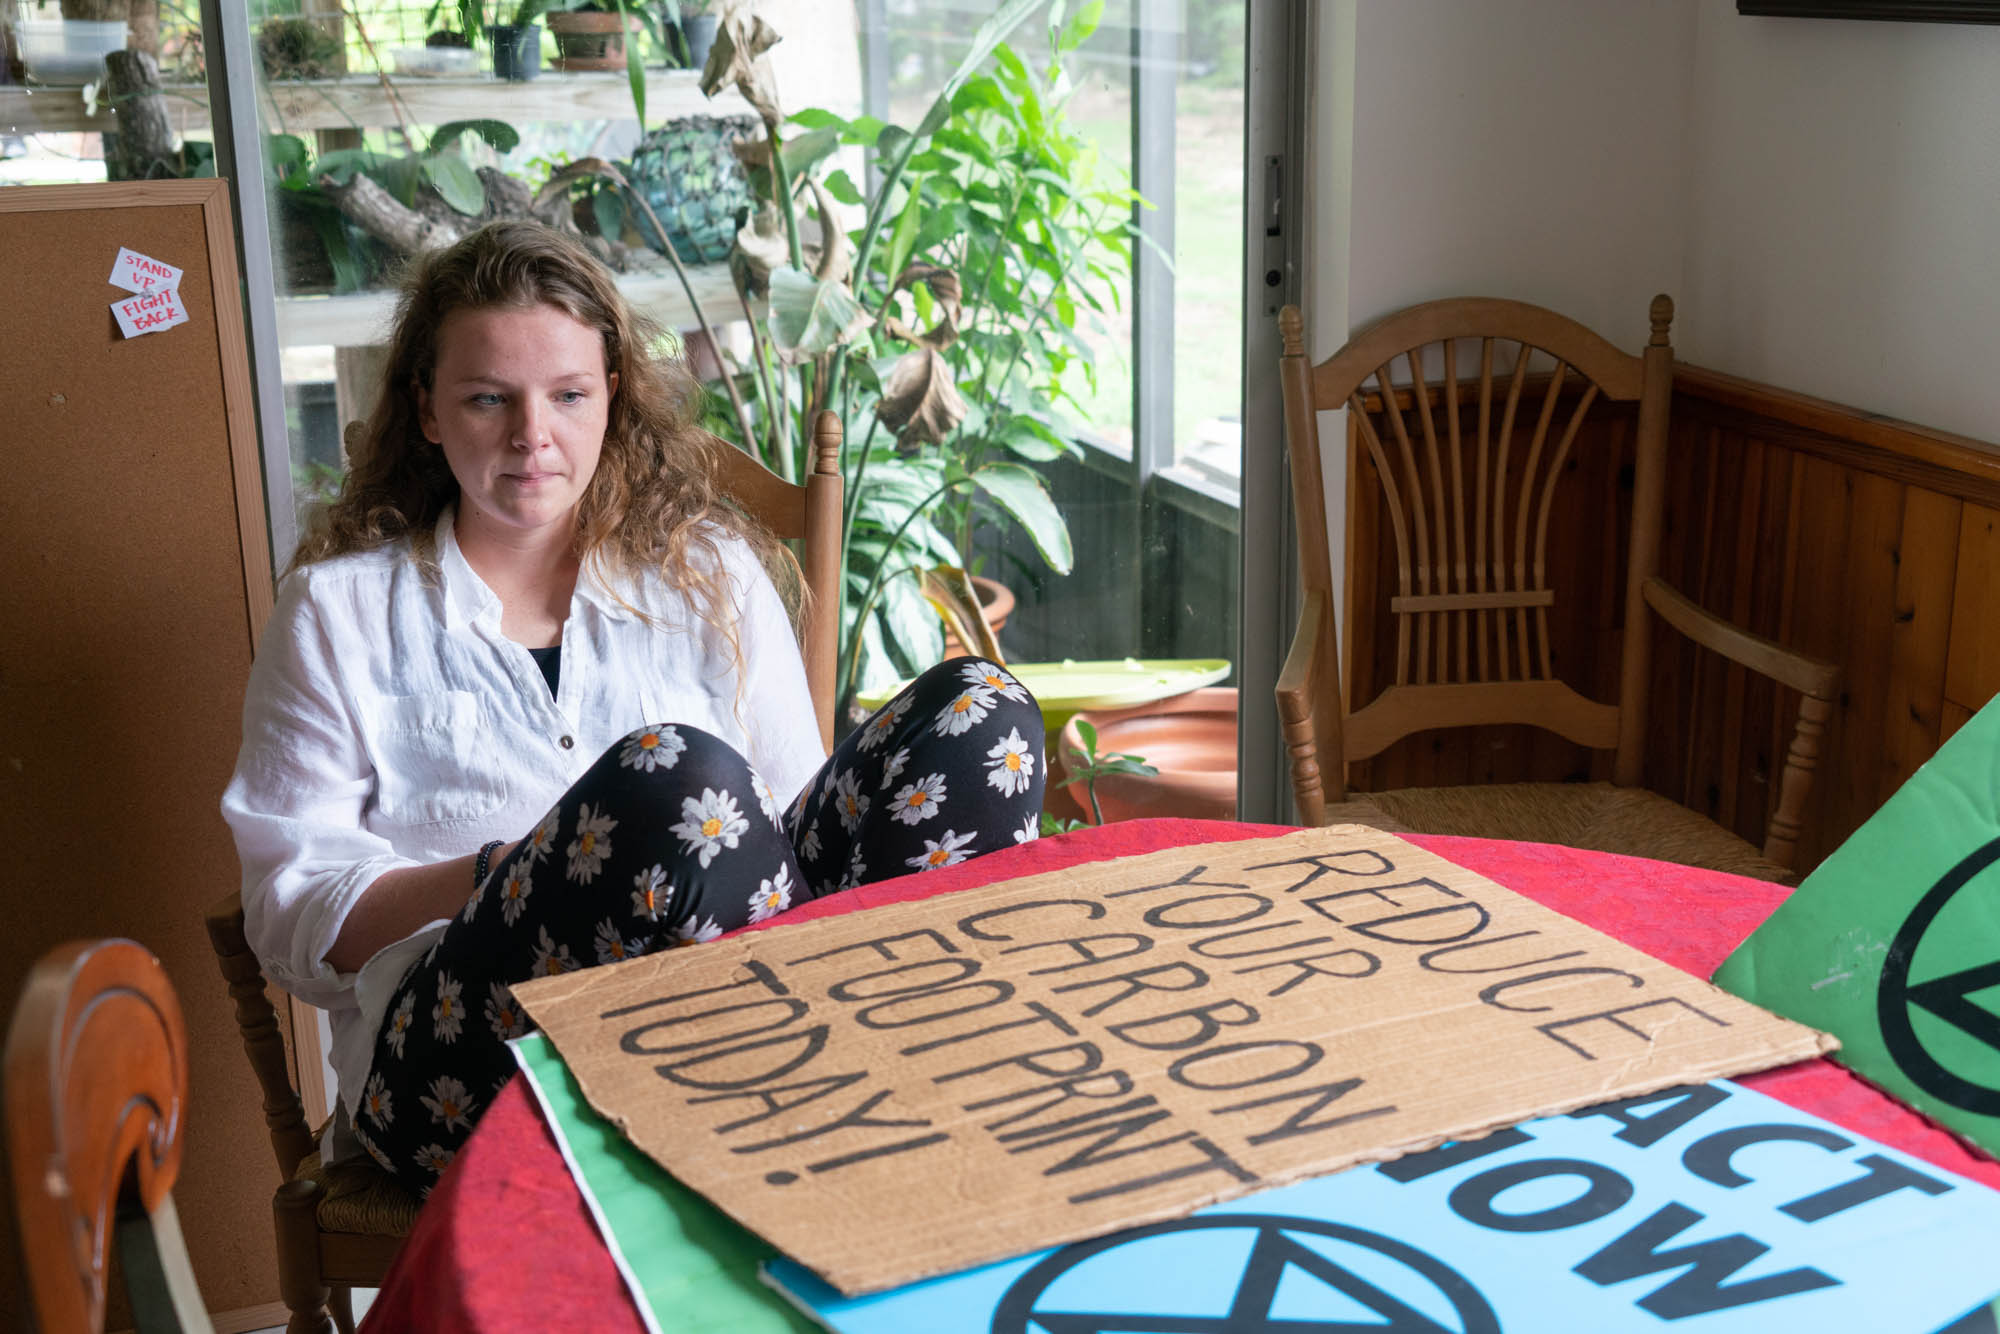 Rachel Collins of Homestead, Florida, has been passionate about climate change for years. But the 21-year-old activist realizes her first protest sign was somewhat naive. The difference individuals can make is minuscule compared to what governments and corporations can do, she said. (Jordan Laird/News21)